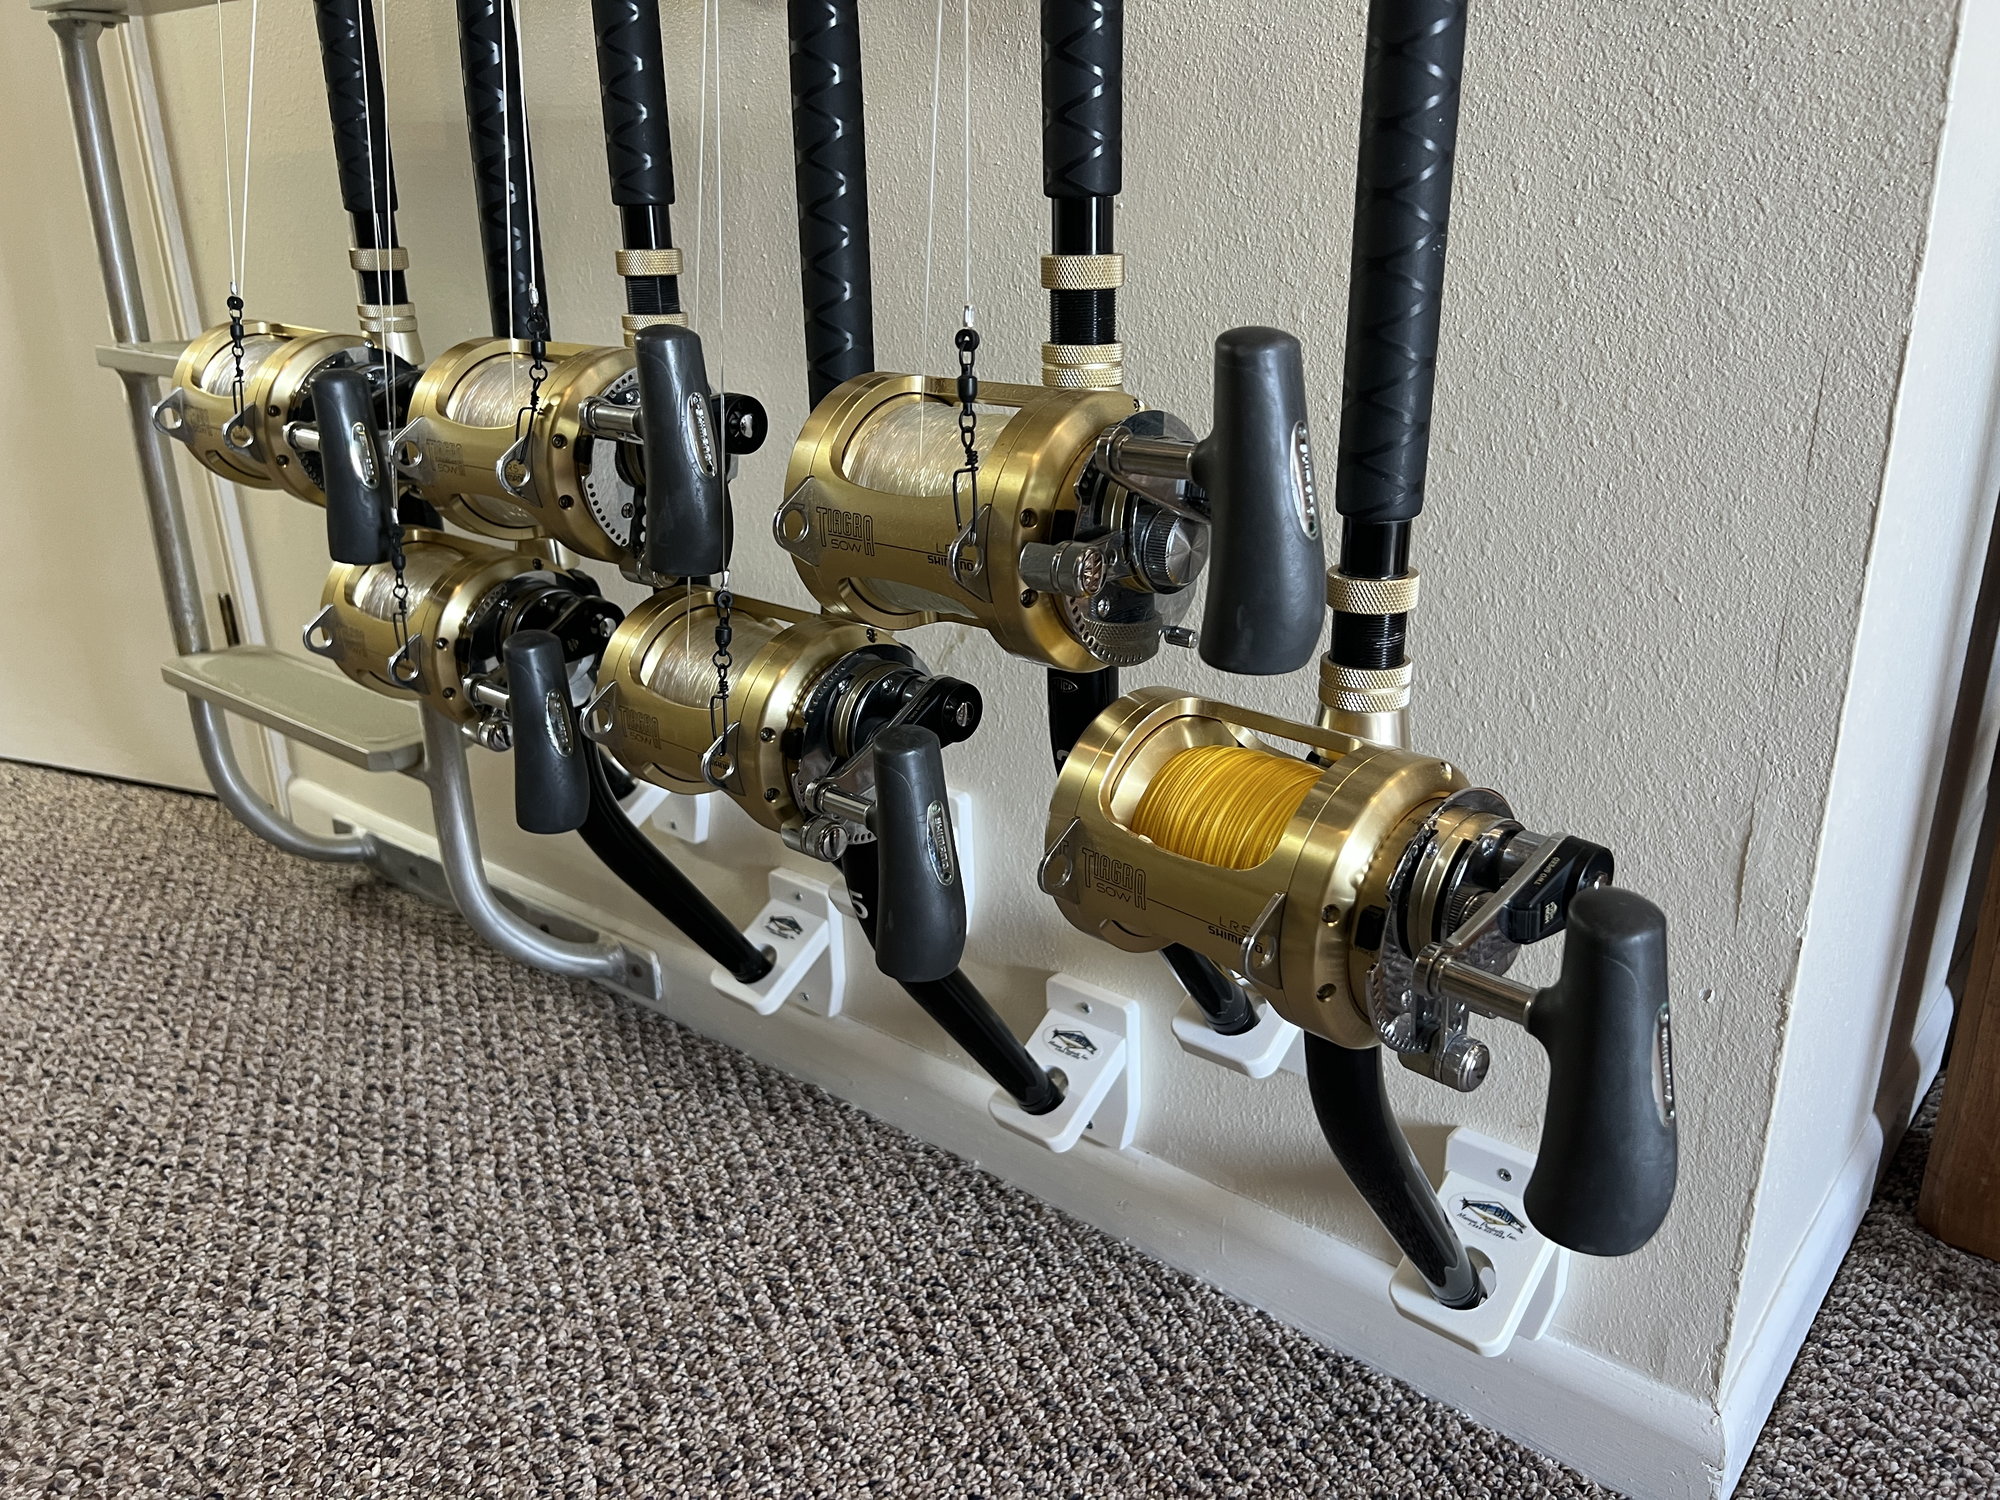 rod holder - The Hull Truth - Boating and Fishing Forum